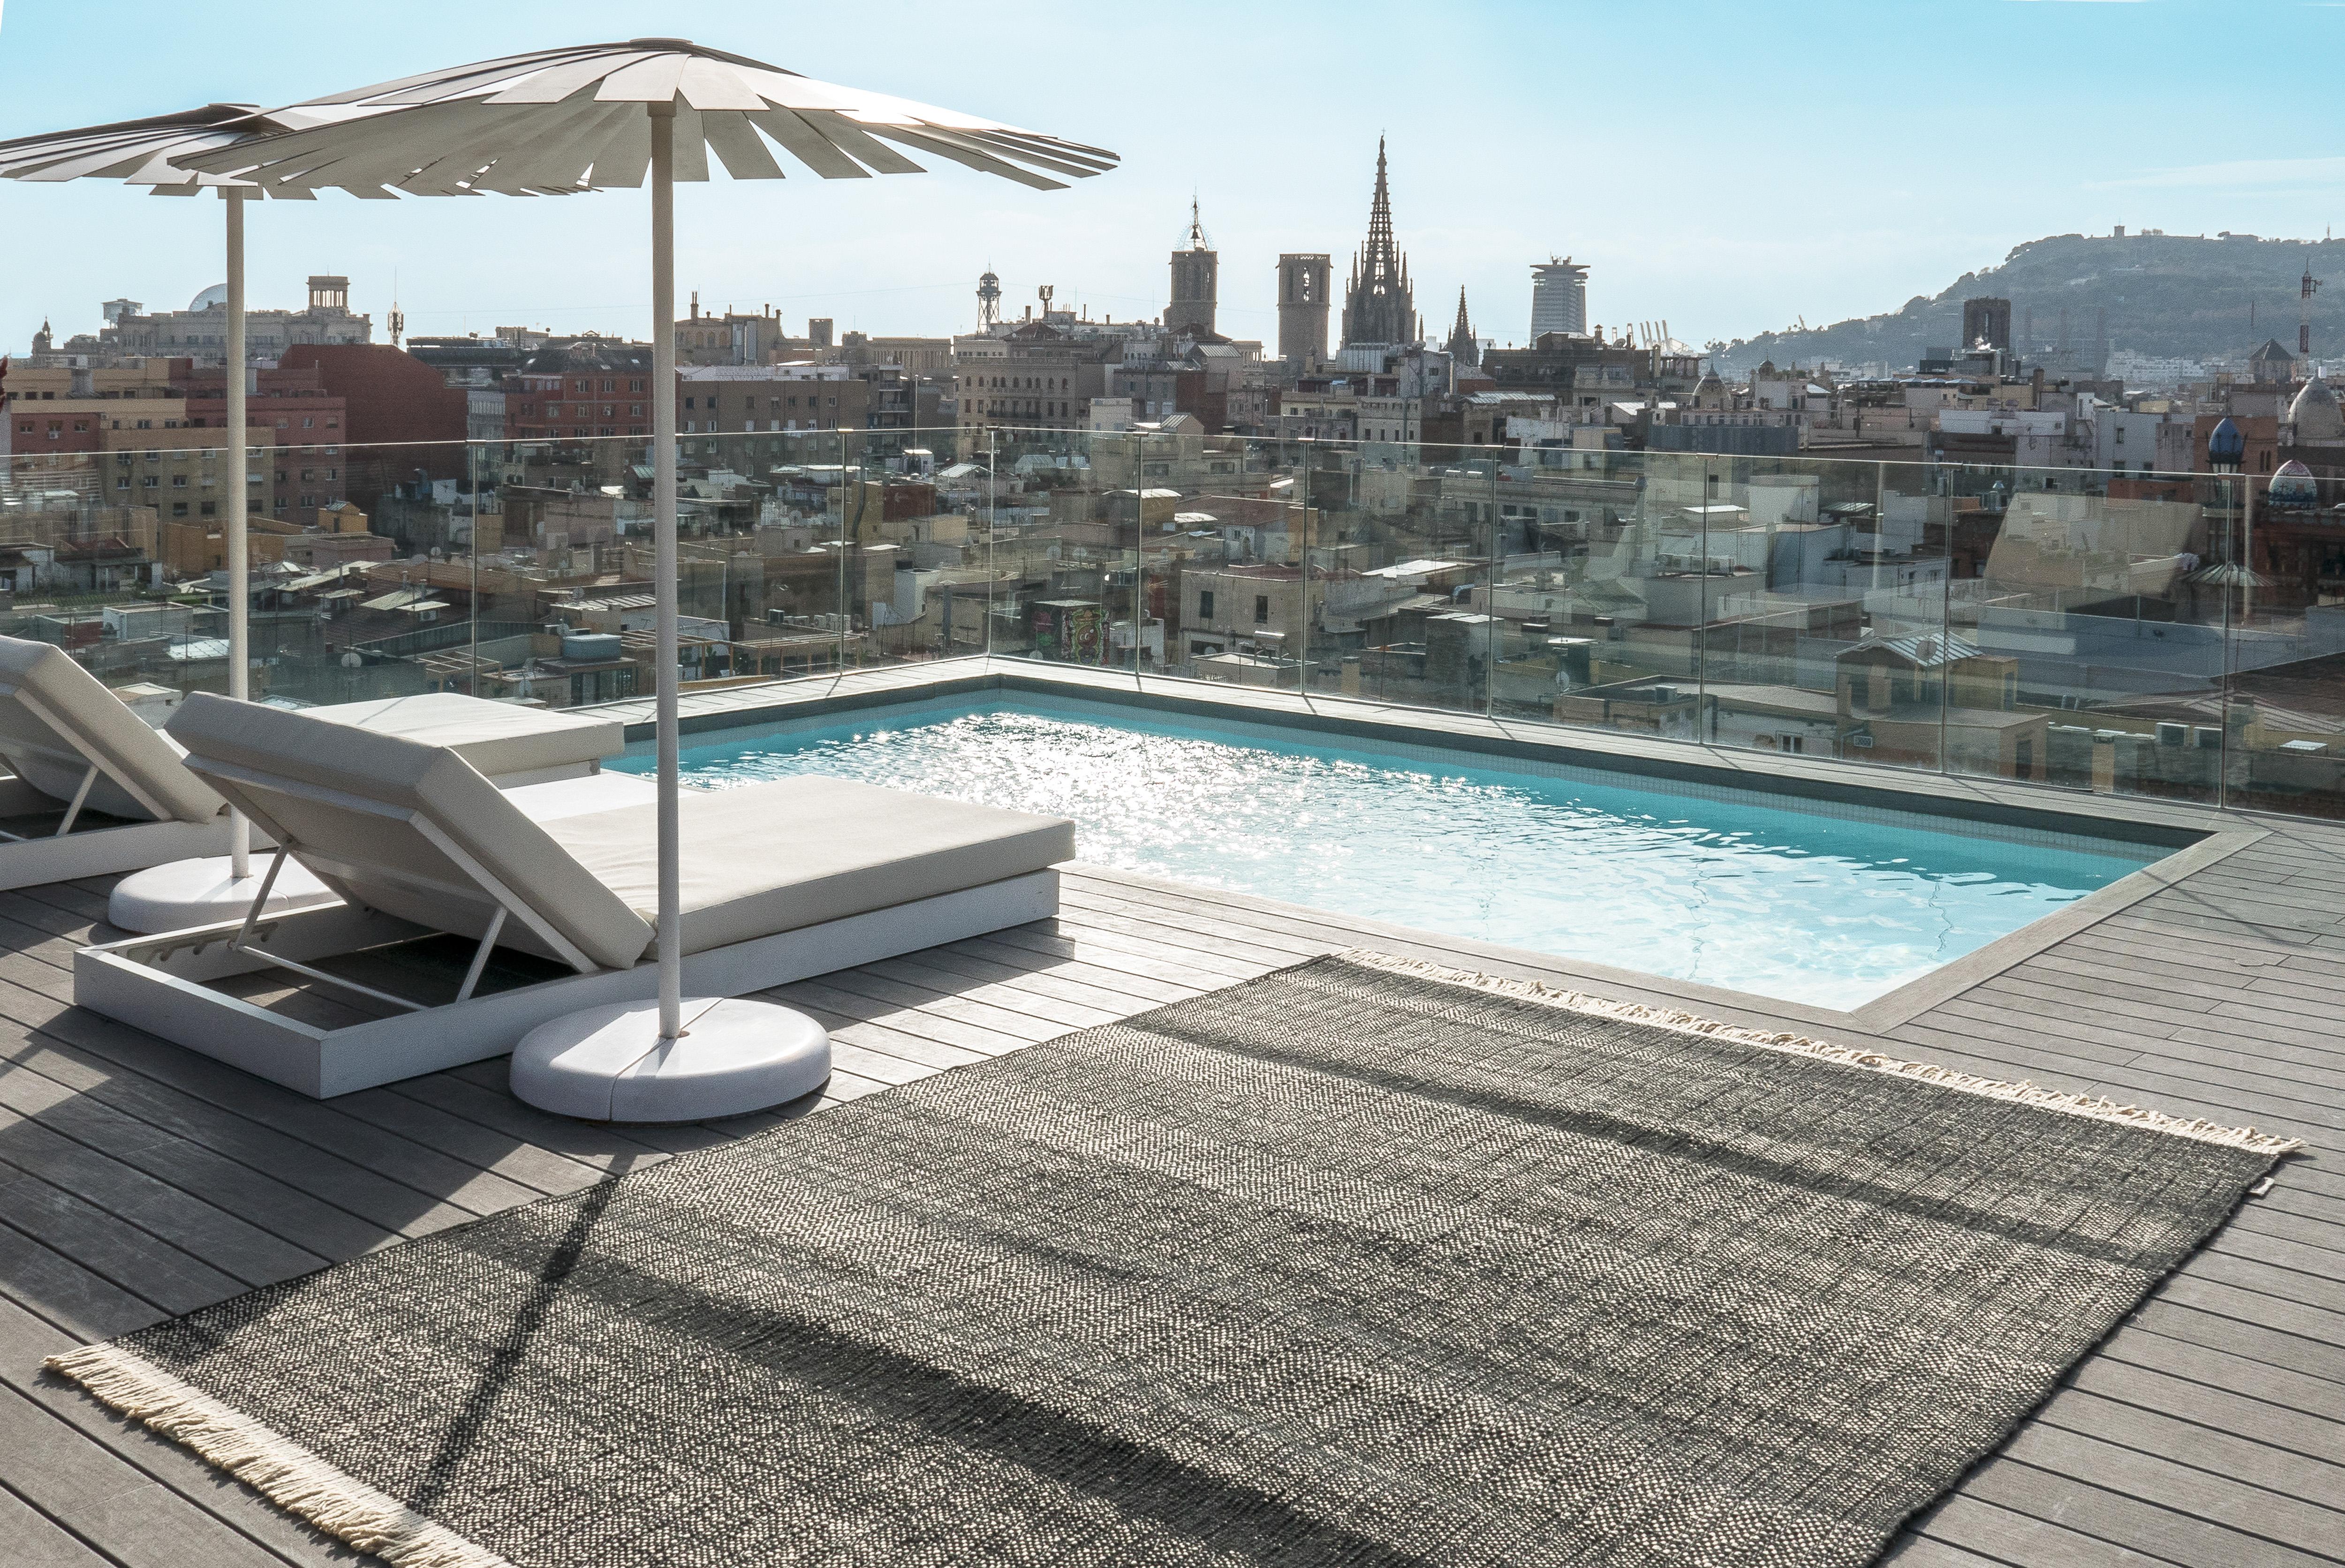 Nanimarquina launches its first line of outdoor rugs specially designed to offer comfort for outdoor spaces. The collection arises from the desire to transfer the warmth of interior spaces to the outside world. Areas where the common denominator is